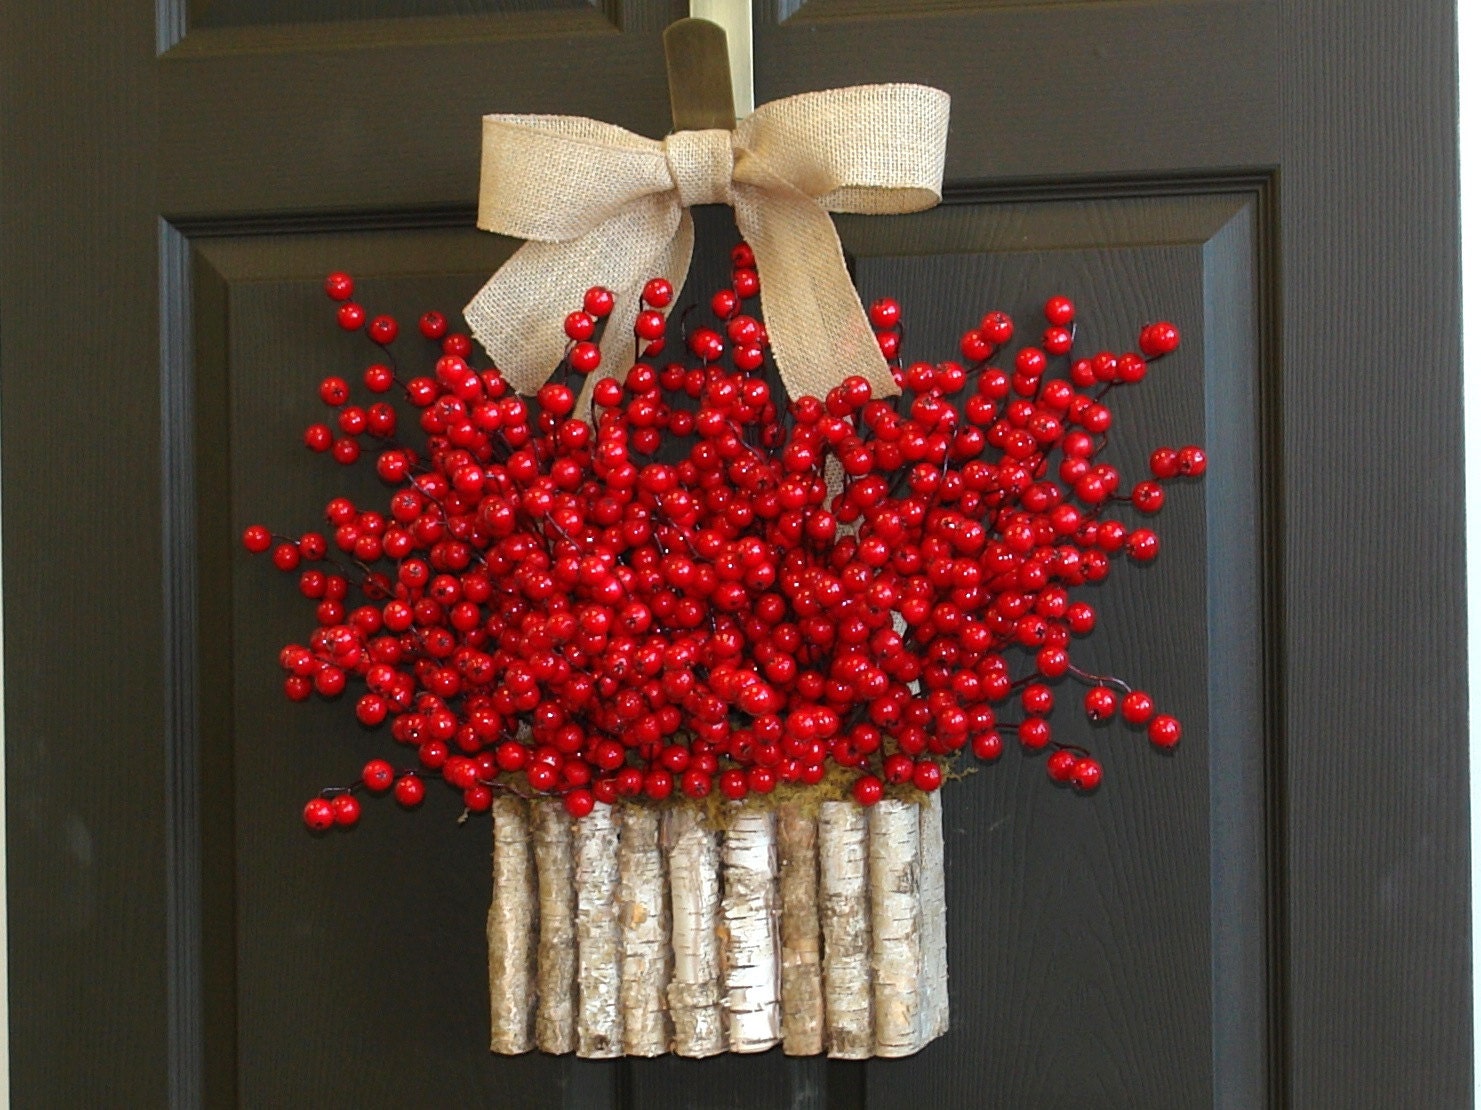 Christmas wreaths Holiday red berry wreaths Seasons Greetings wreaths Christmas front door birch bark vases wreath decorations